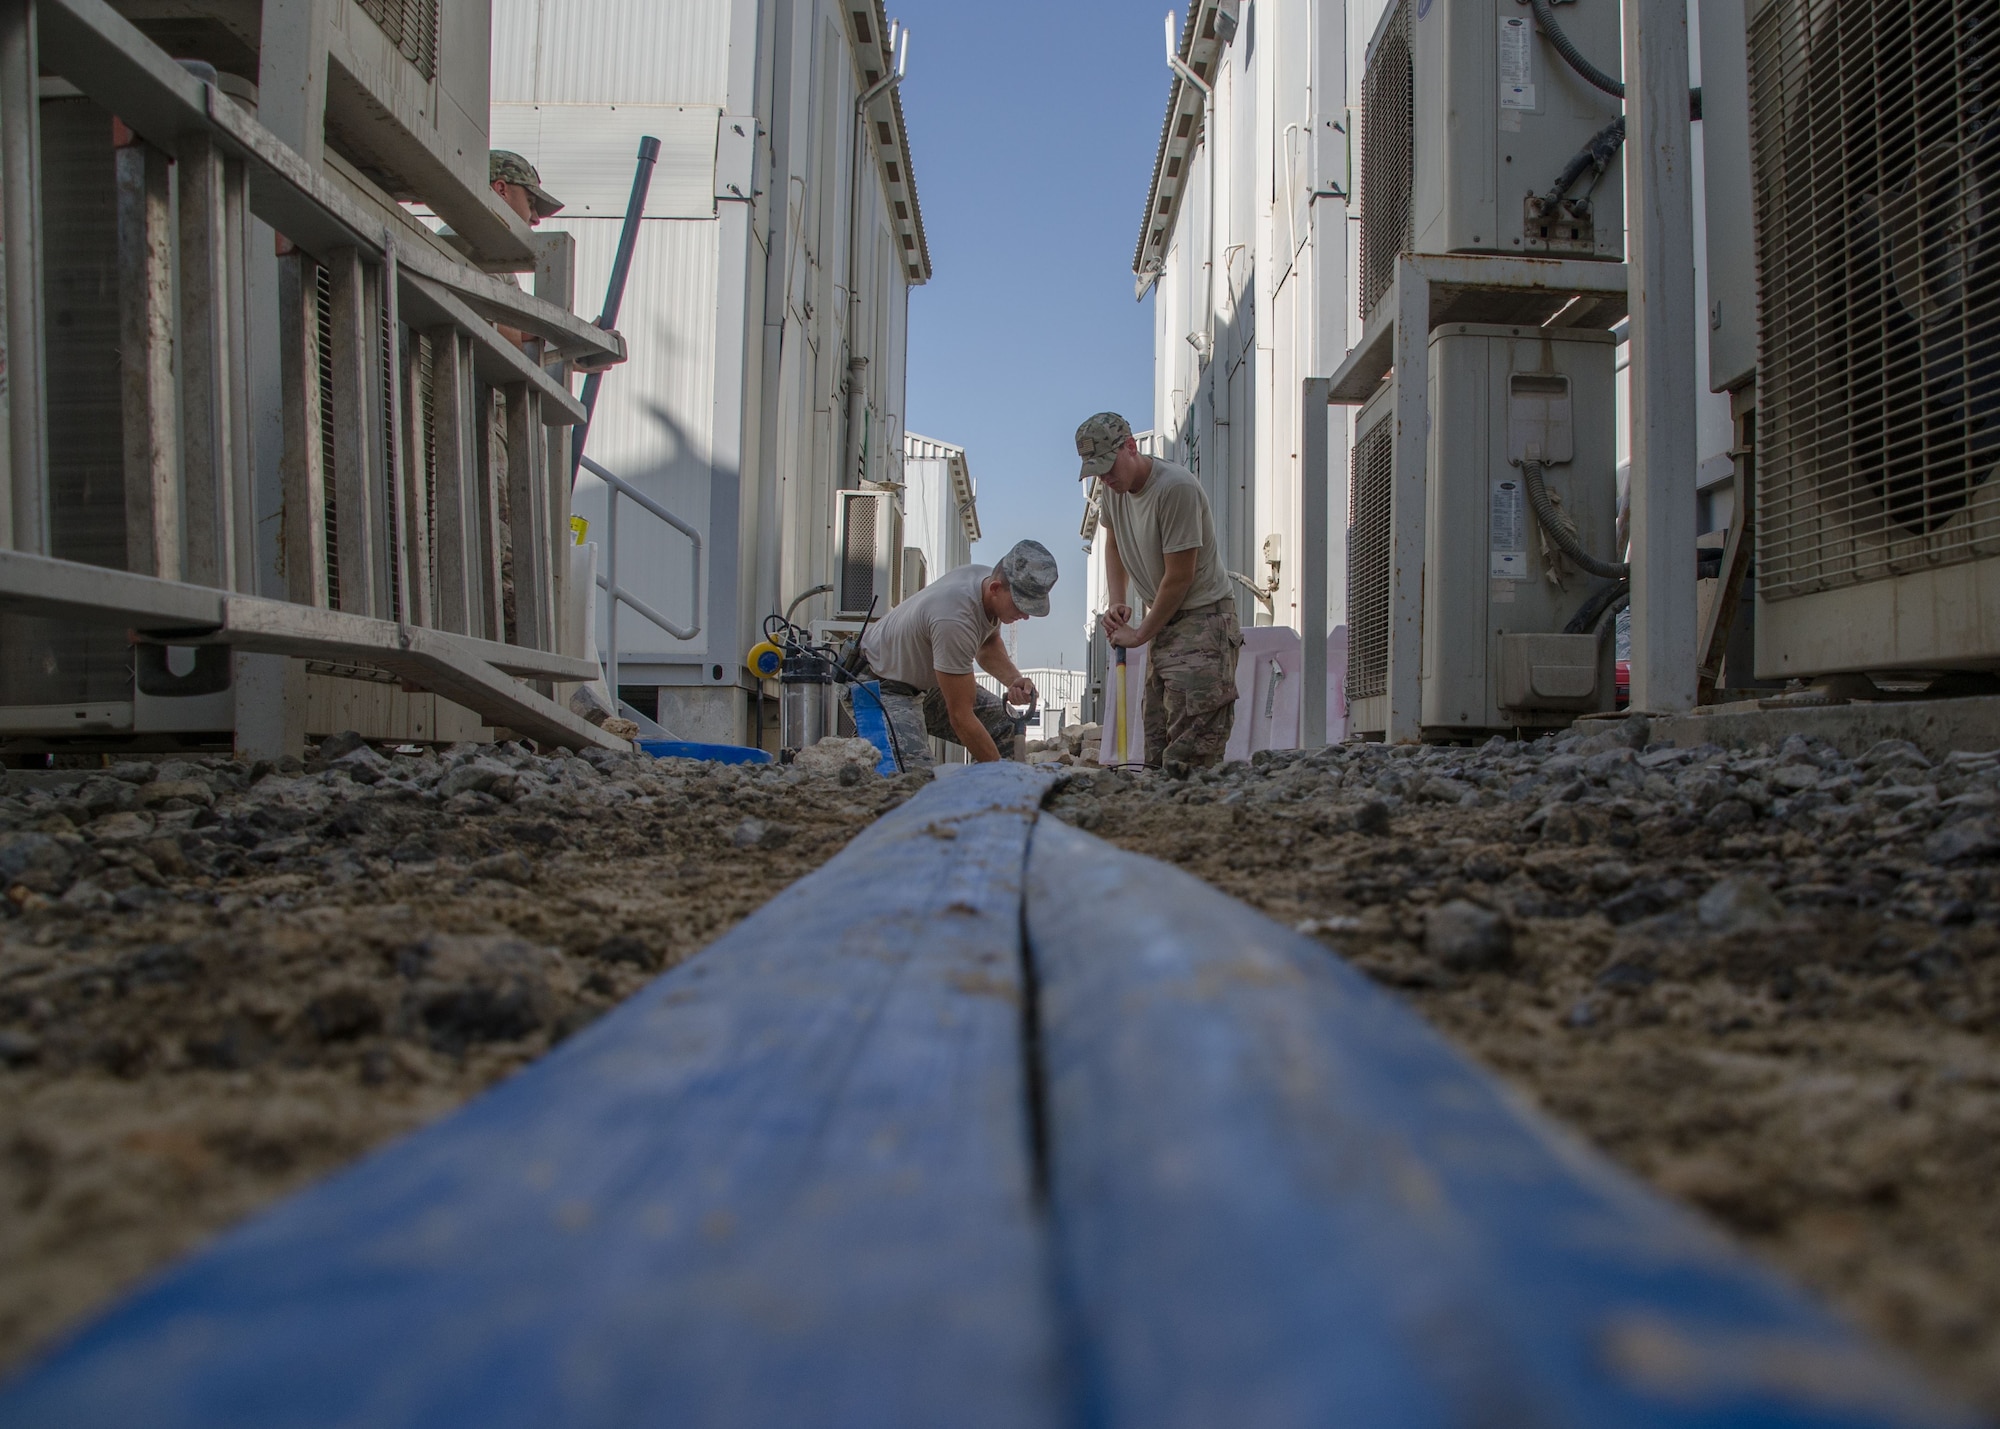 Airmen from the 380th Expeditionary Civil Engineering Squadron, water and fuels maintenance restore a damaged water pipe at Al Dhafra Air Base, United Arab Emirates Jan. 11, 2018.  Water and fuels manage the plumbing, wastewater collection system, liquid fuel storage and natural gas distribution systems on every base. (U.S. Air National Guard photo by Staff Sgt. Colton Elliott)